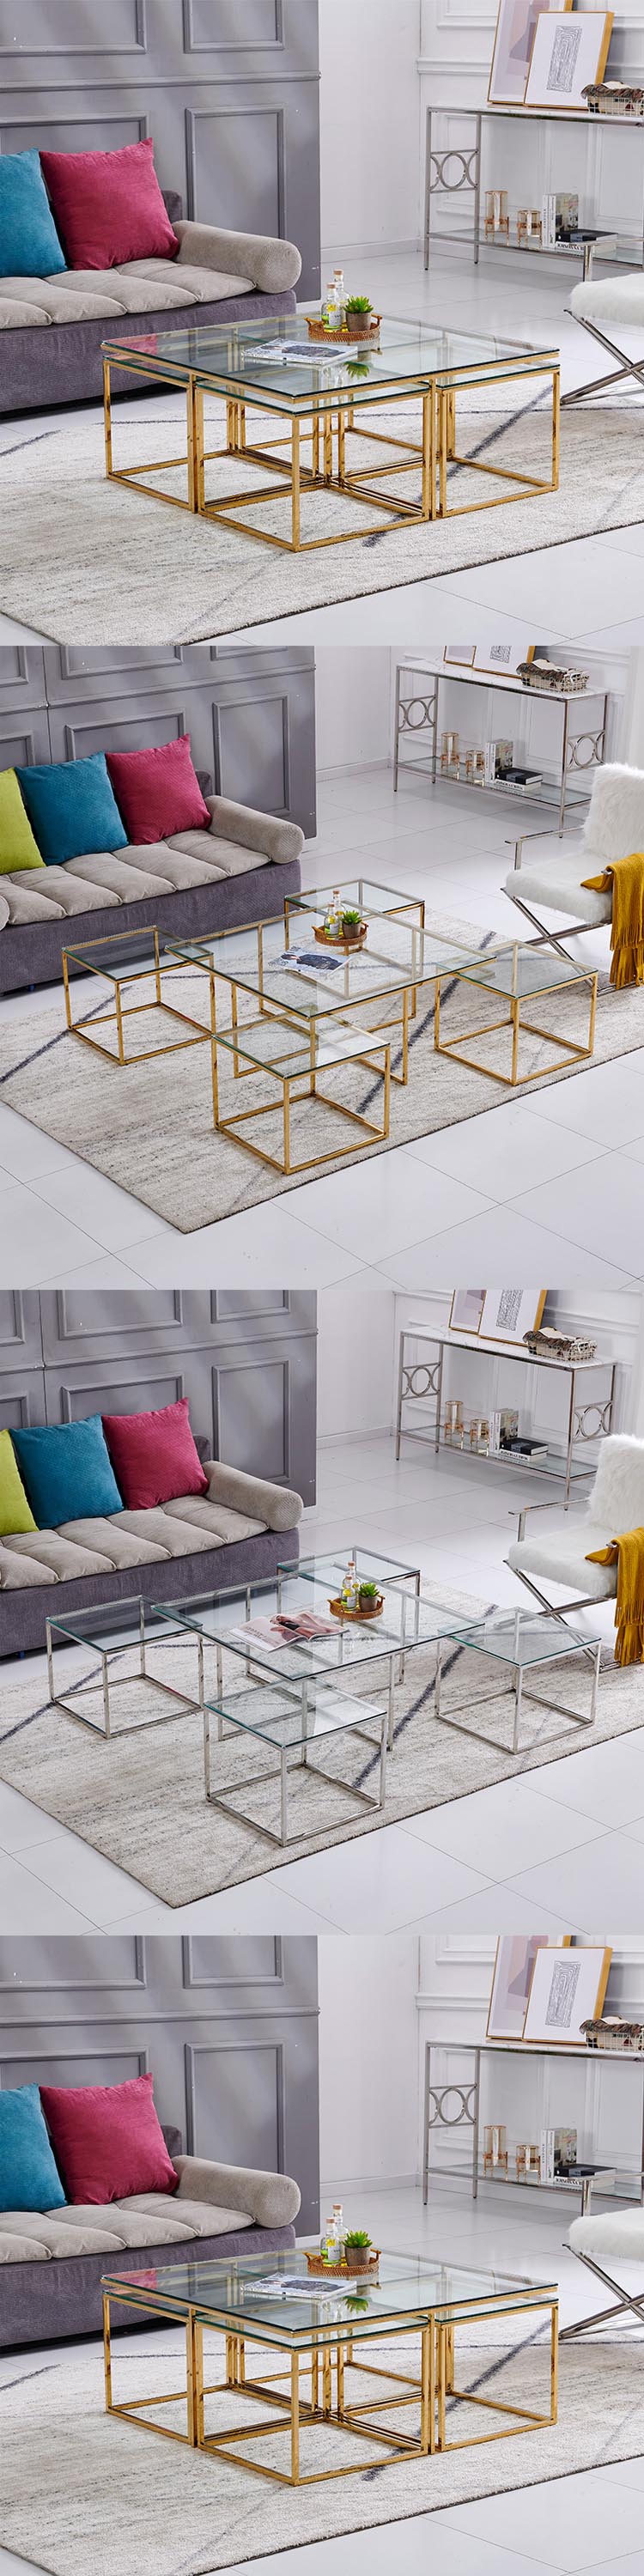 New Design Living Room Home Stainless Steel Square Coffee Table Golden Color Glass Top Centre Table